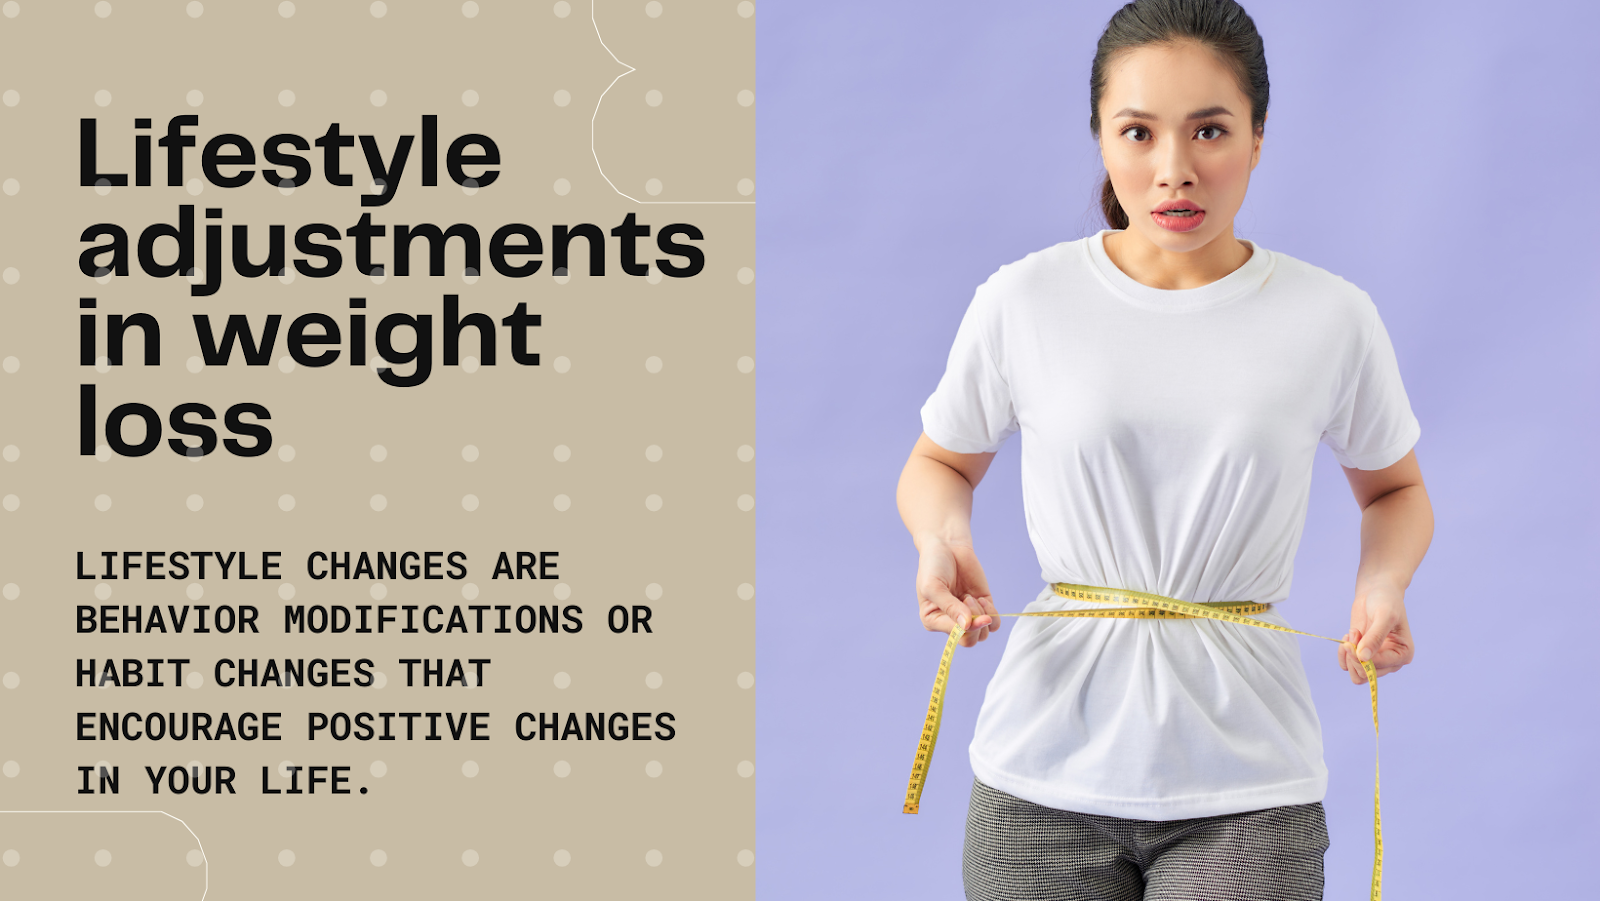 lightstyle adjustment in weight loss